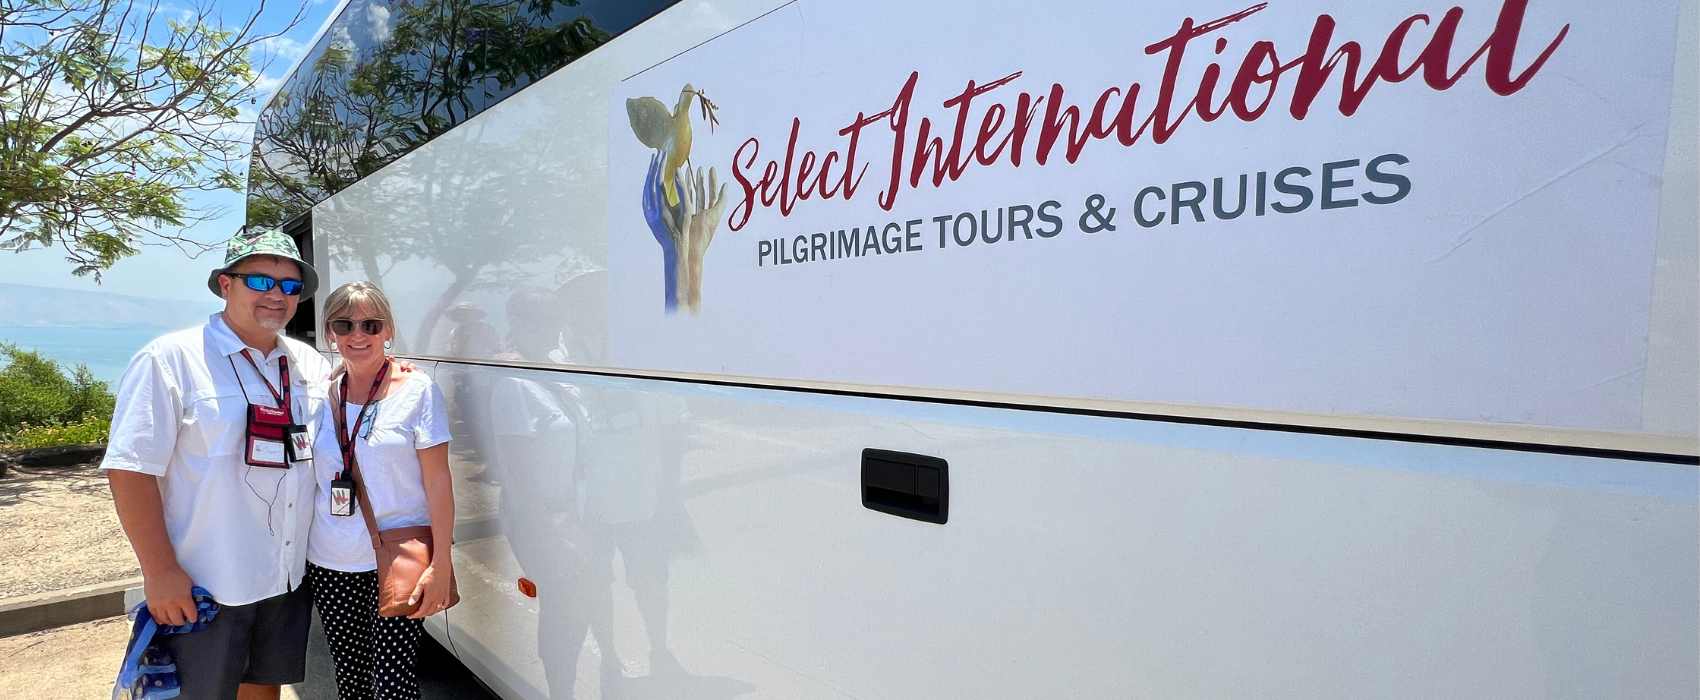 Holy Land Pilgrimages with Select International Tours